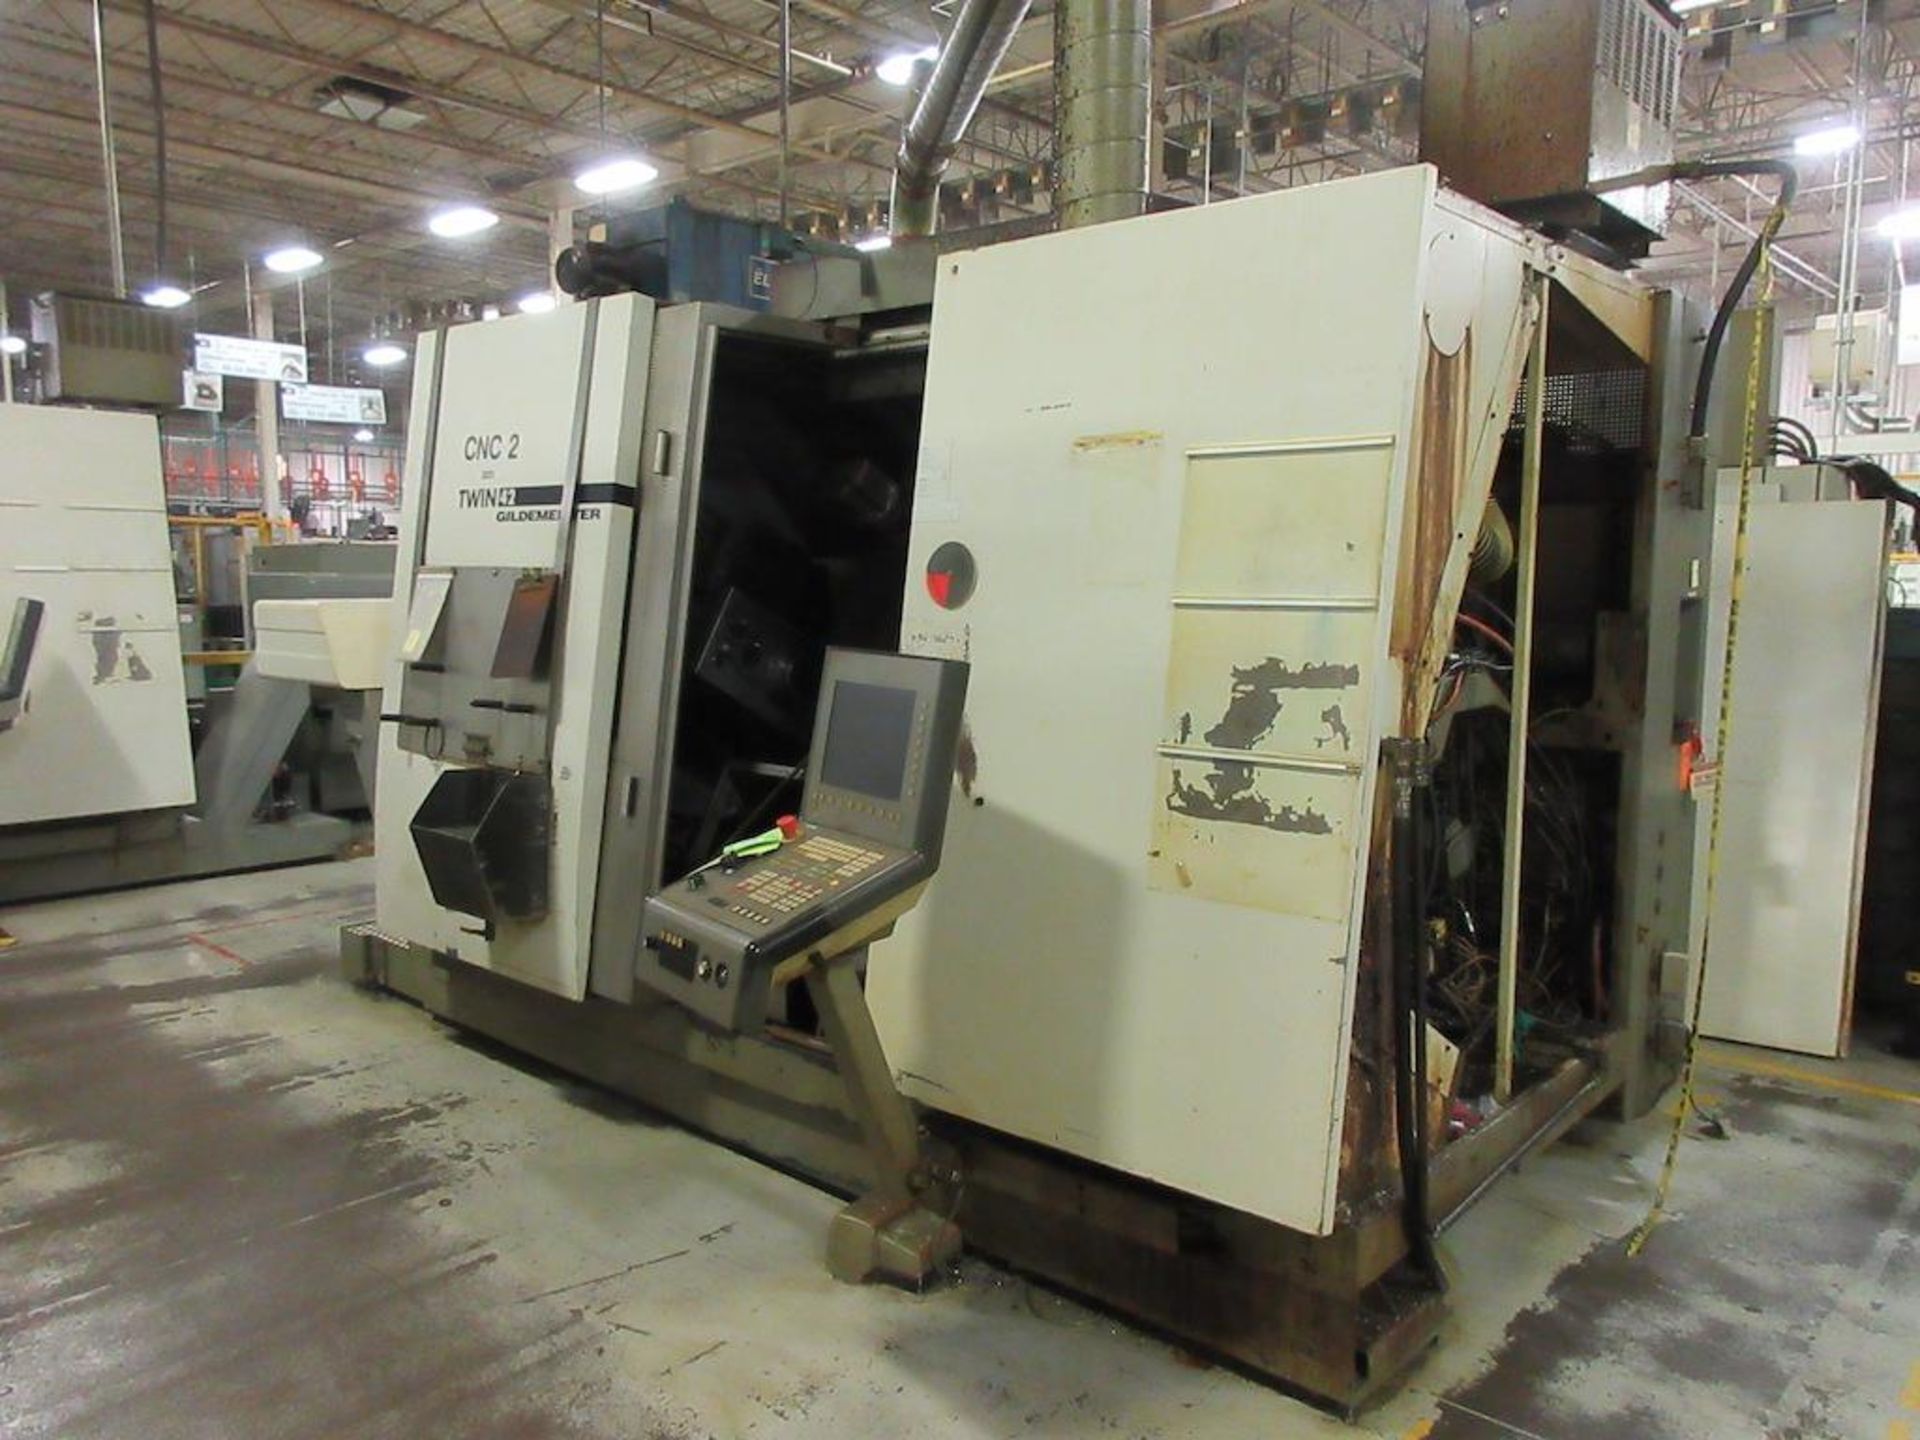 2006 DMG CNC Lathe, Model Twin 42, Twin Spindle, 4 Axis, with CNC Control, B-Axis, Swing Diameter